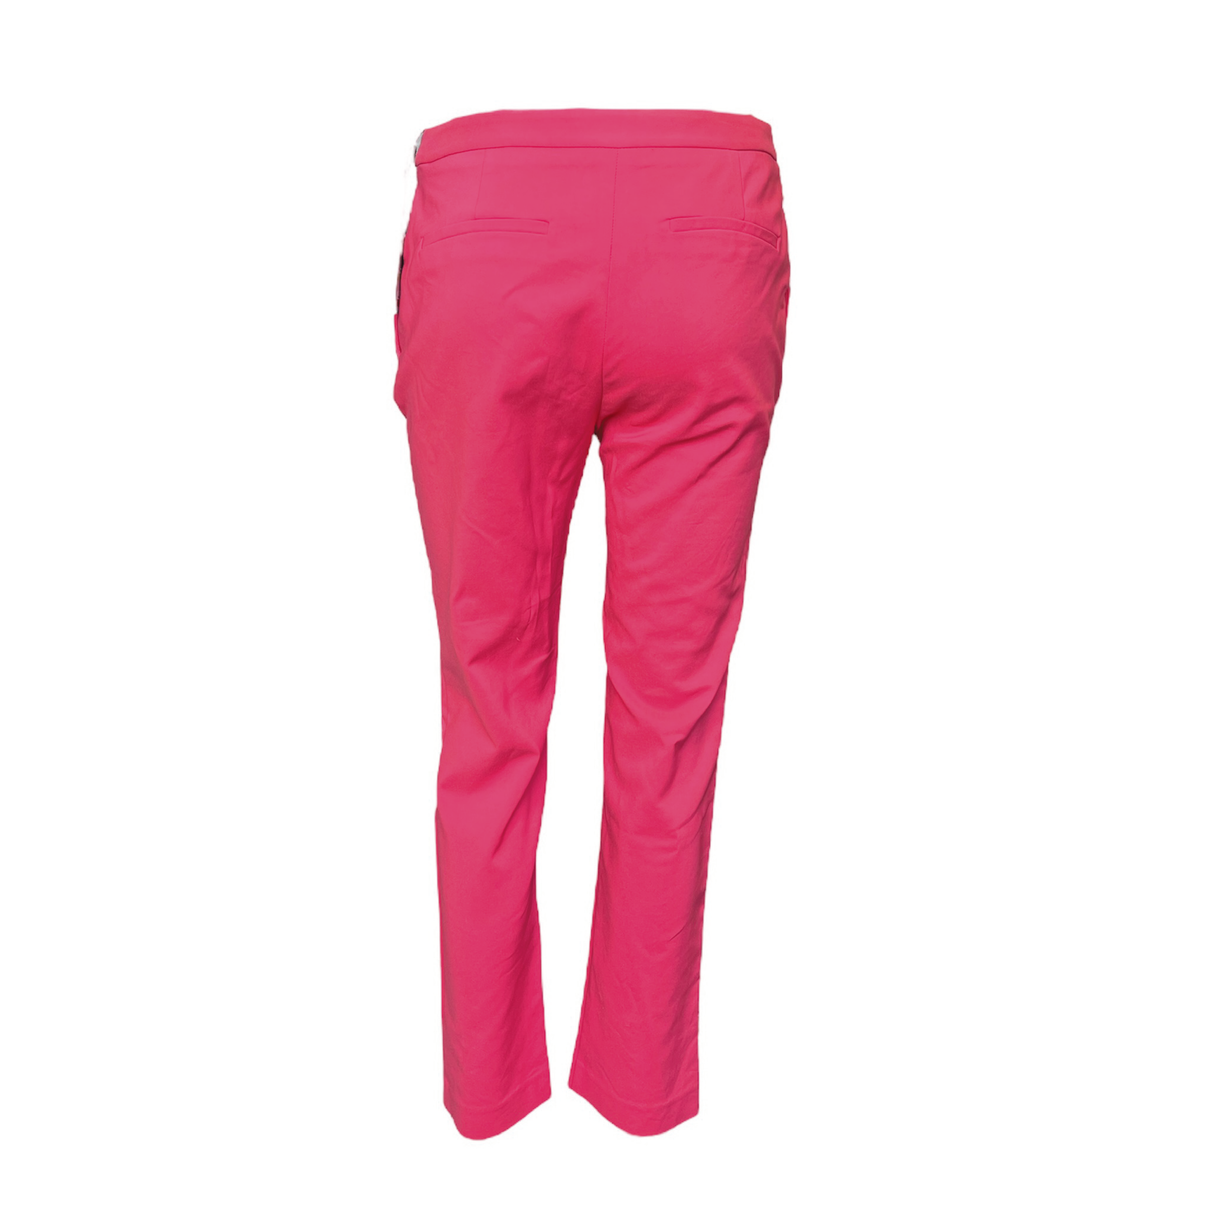 A Second Chance - Calvin Klein Pant 4 Women Brand New  - Delivery All Over Lebanon